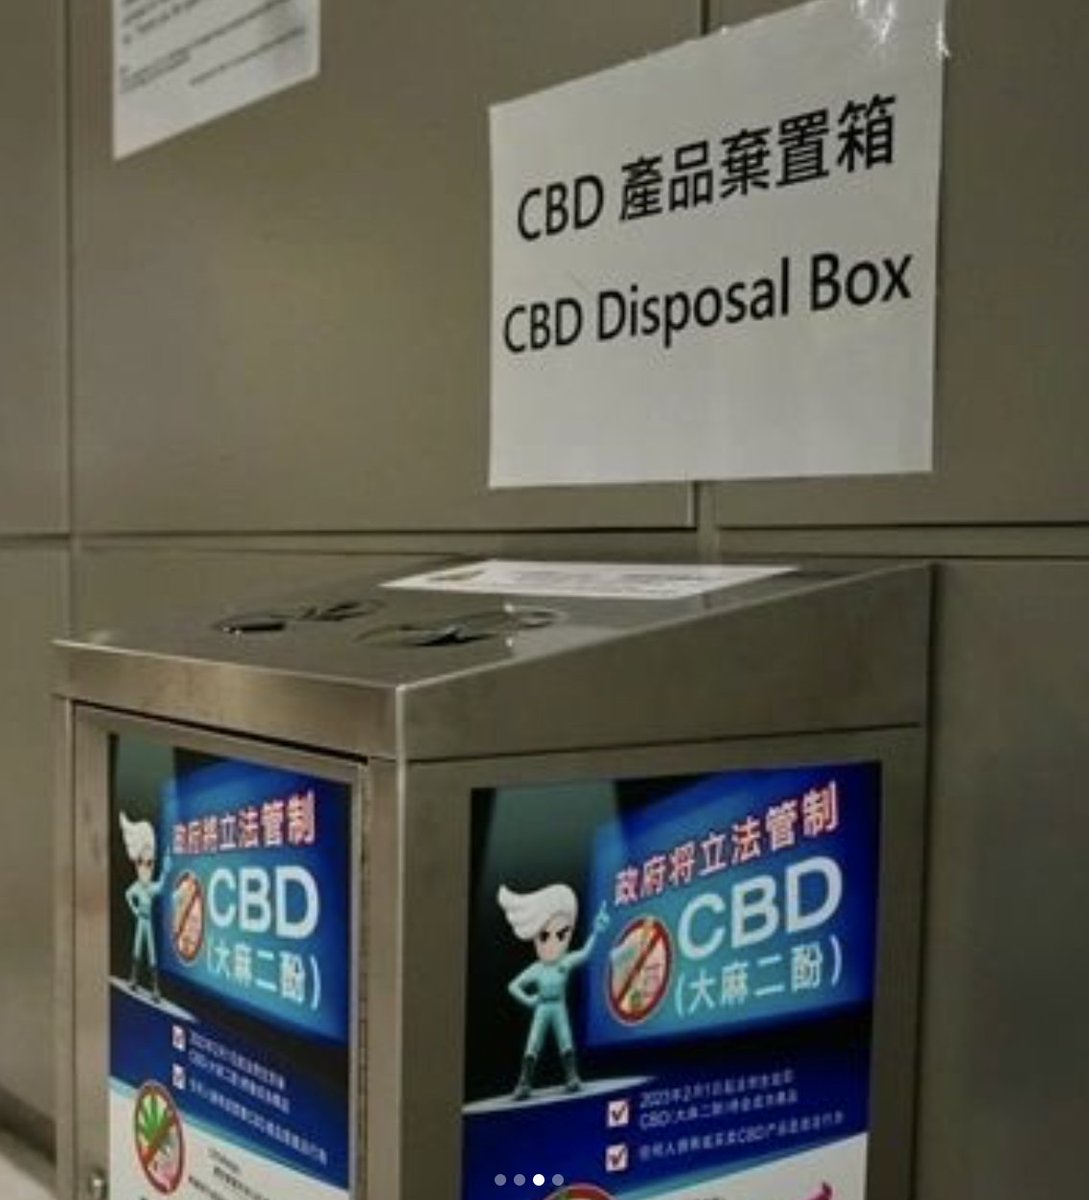 🇭🇰 As of today Hong Kong classifies CBD as a 'dangerous drug', alongside cocaine and heroin. Residents are encouraged to discard CBD products in disposal boxes like this one.